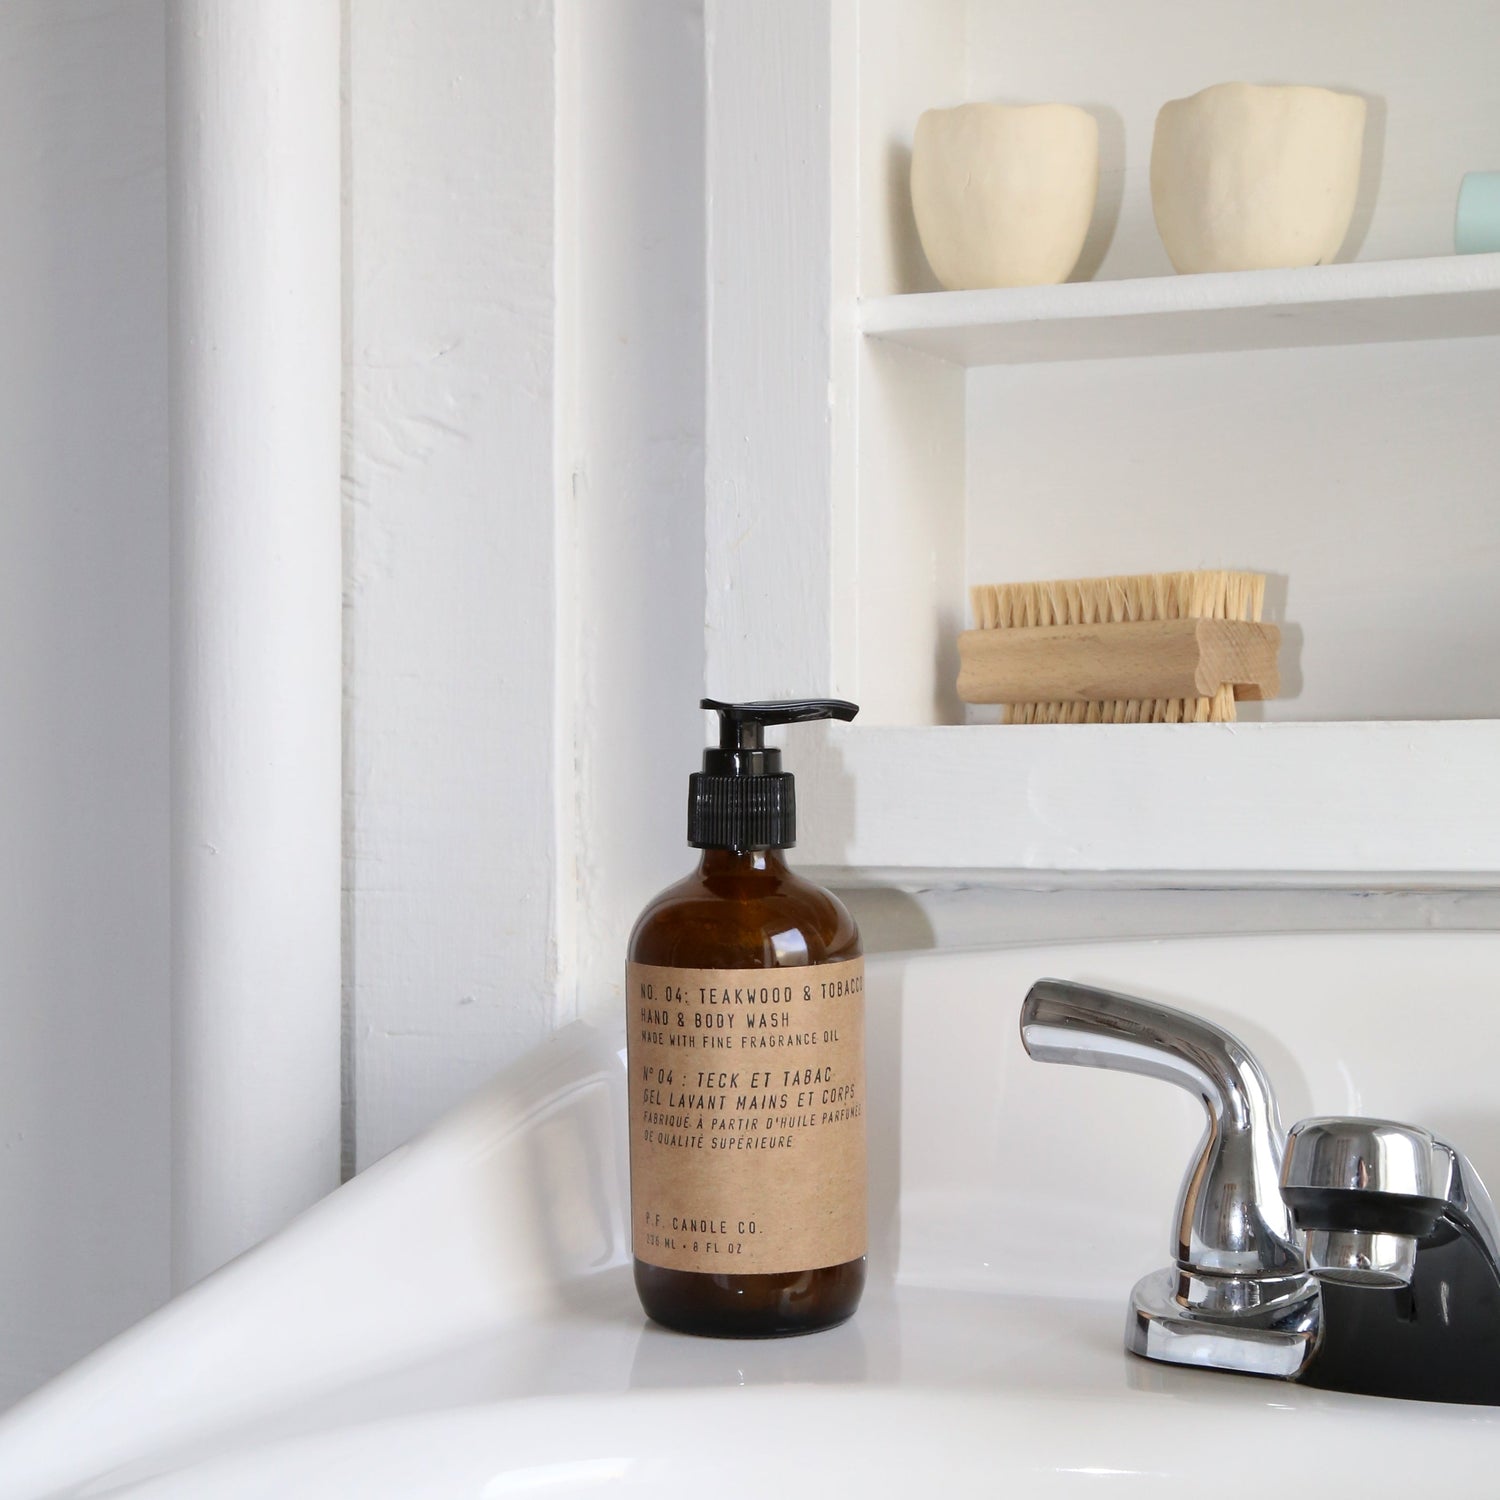 P.F Candle Co. Teakwood + Tobacco Hand & Body Wash available at Rook & Rose.